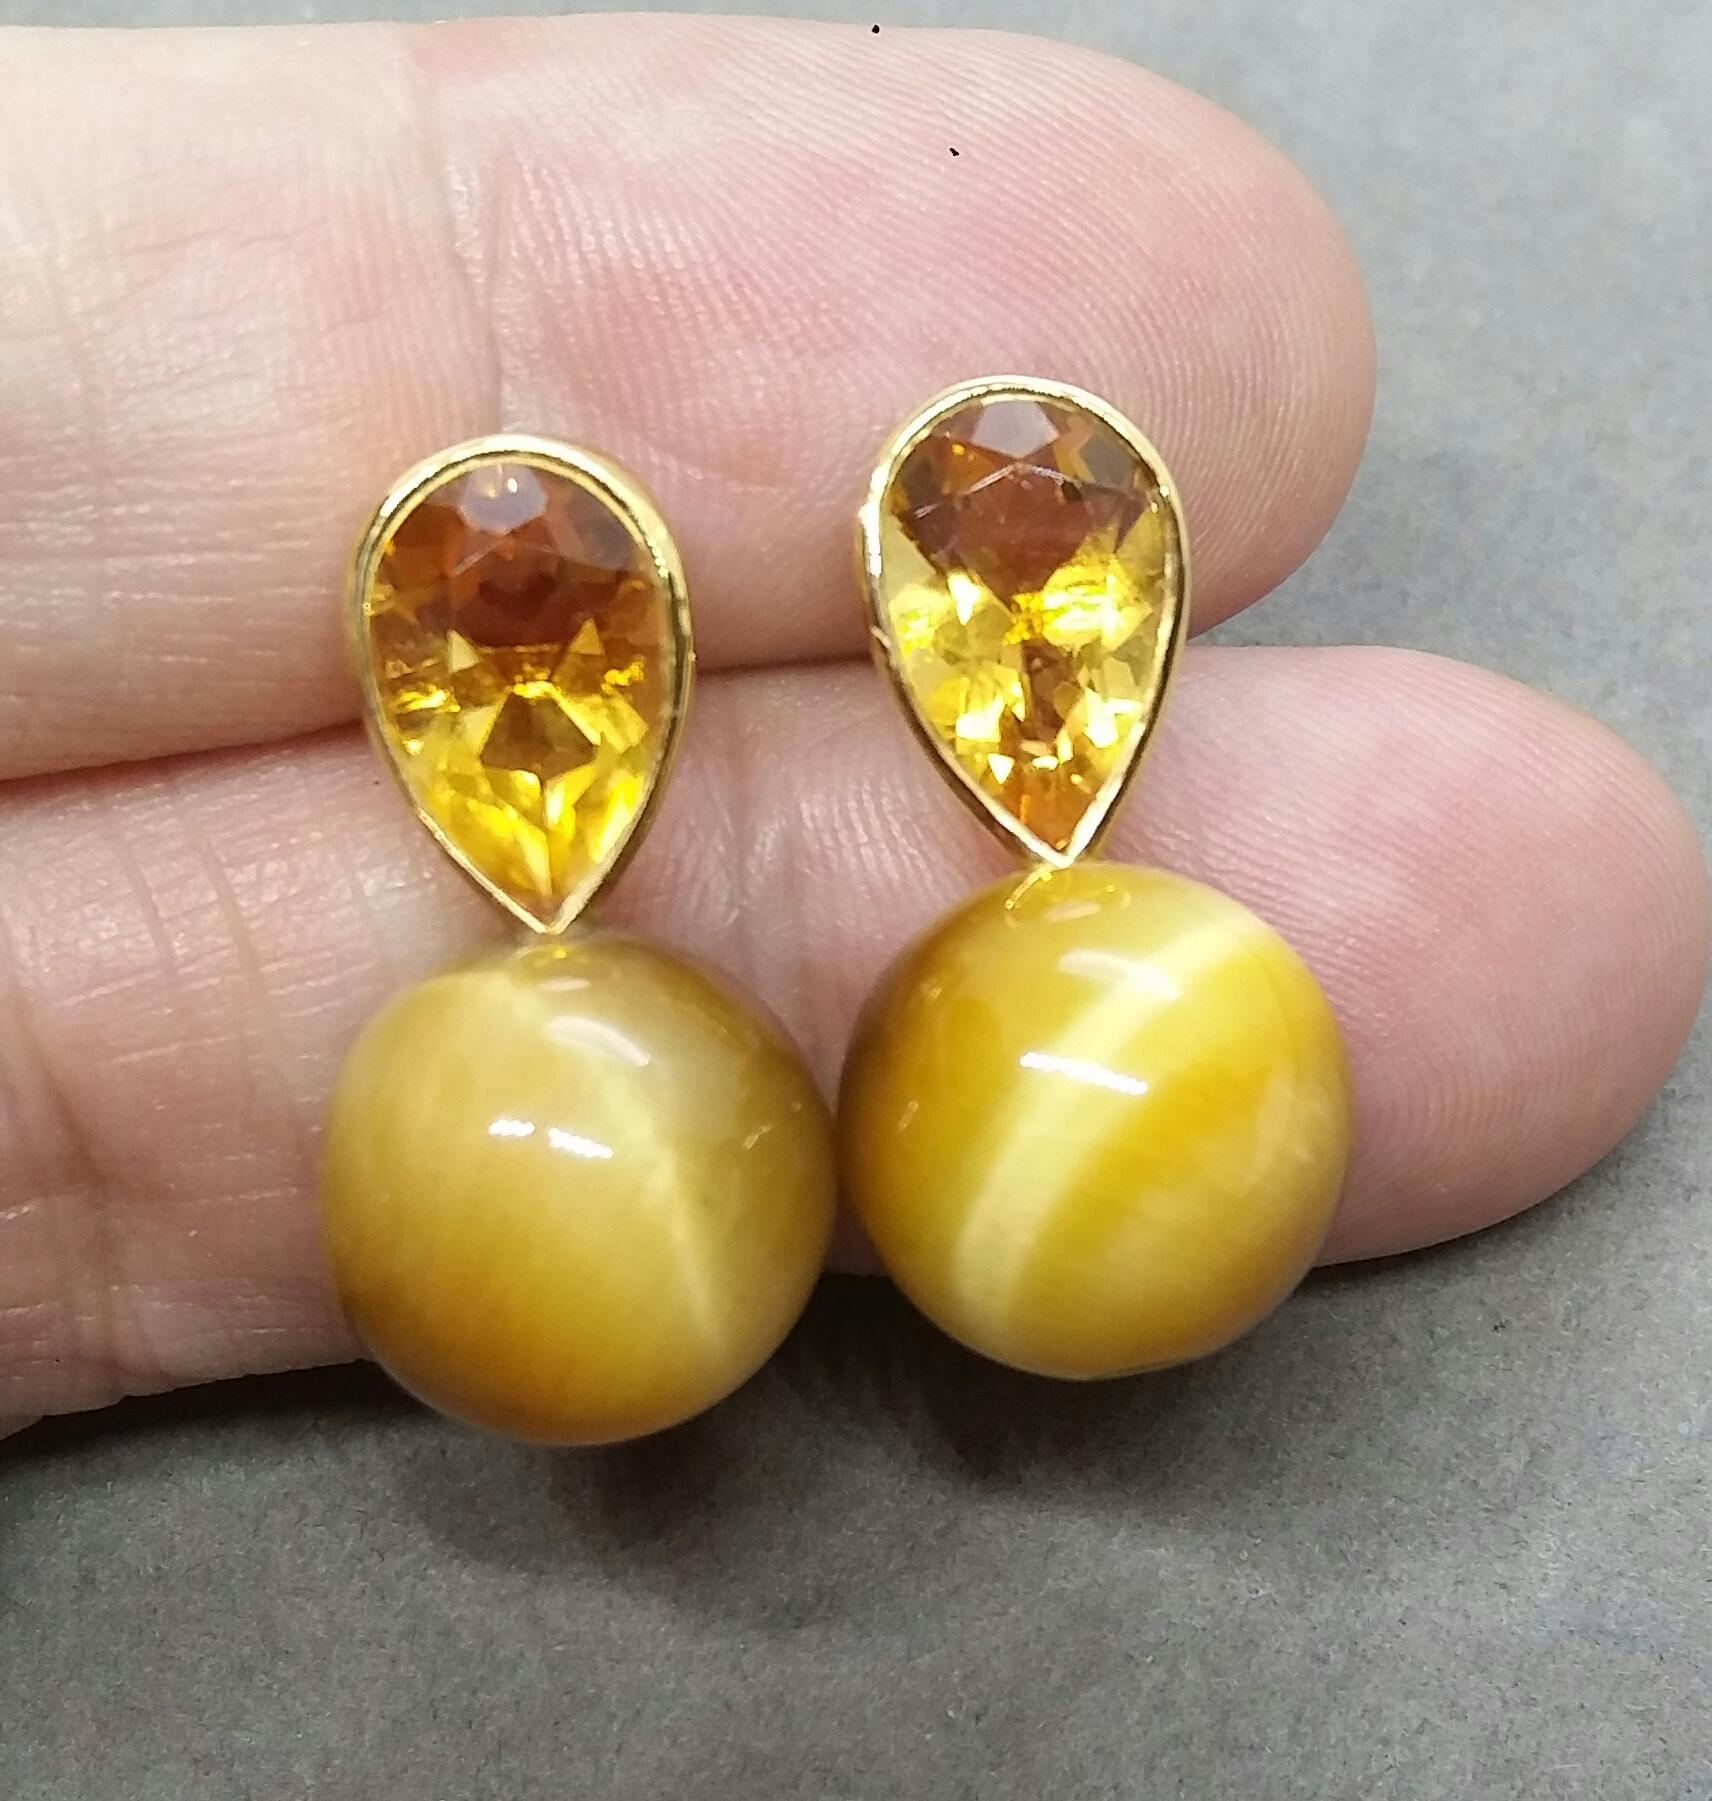 14 K Gold Pear Shape Faceted Citrine Golden Tiger Eye Round Beads Stud Earrings For Sale 4